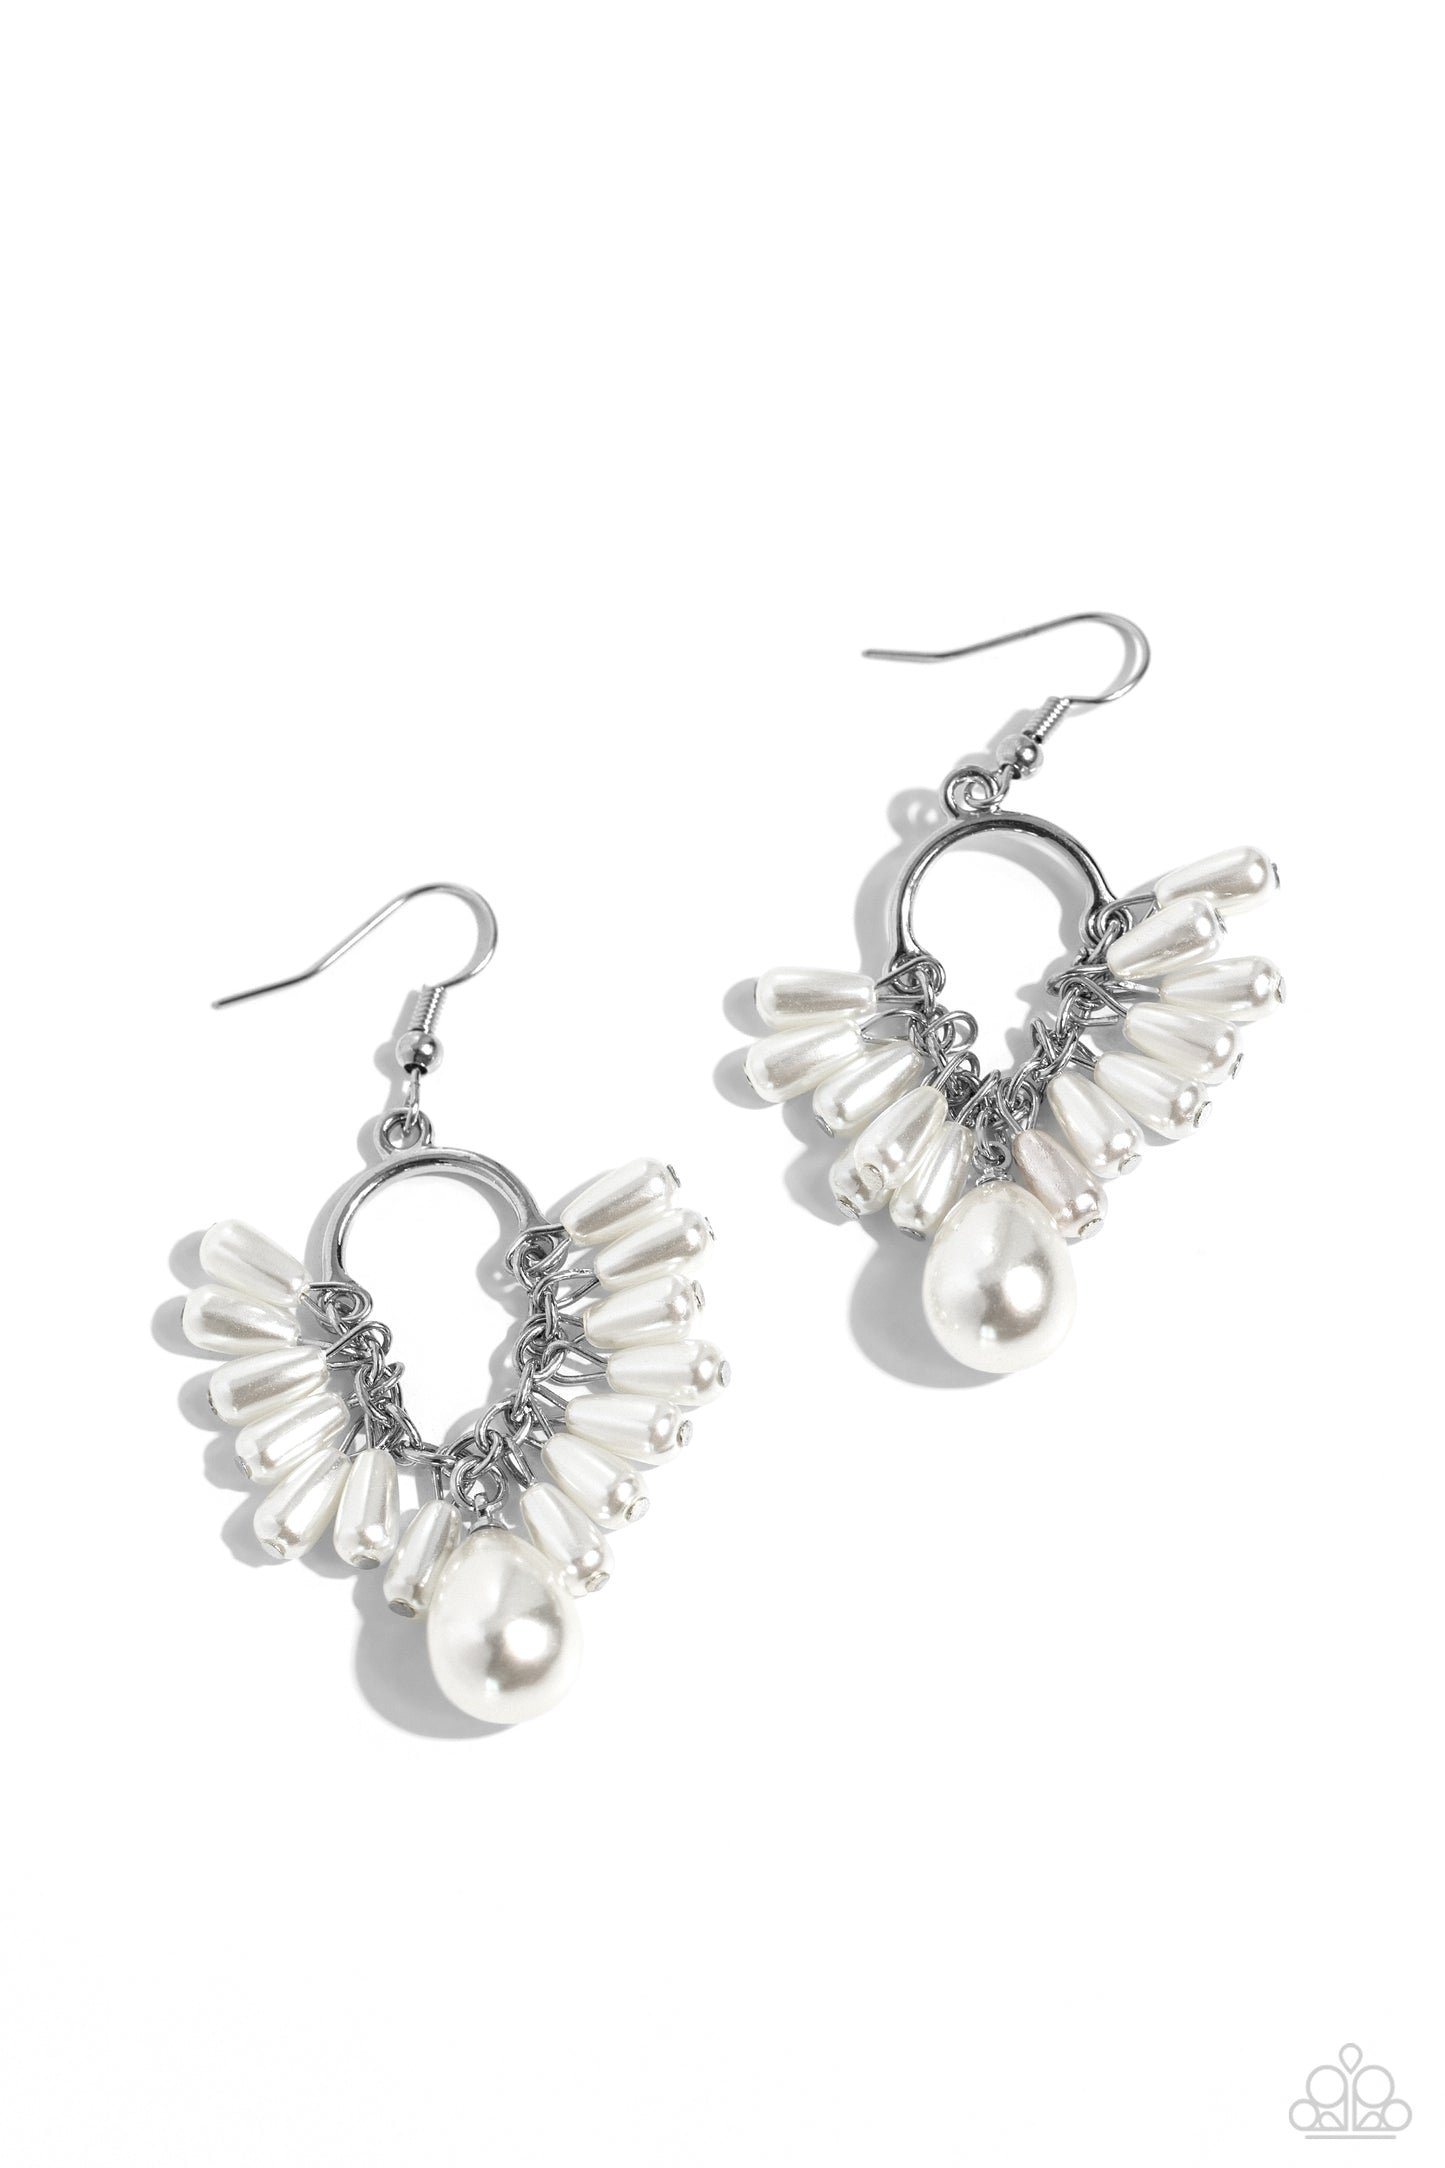 Ahoy There! - white - Paparazzi earrings